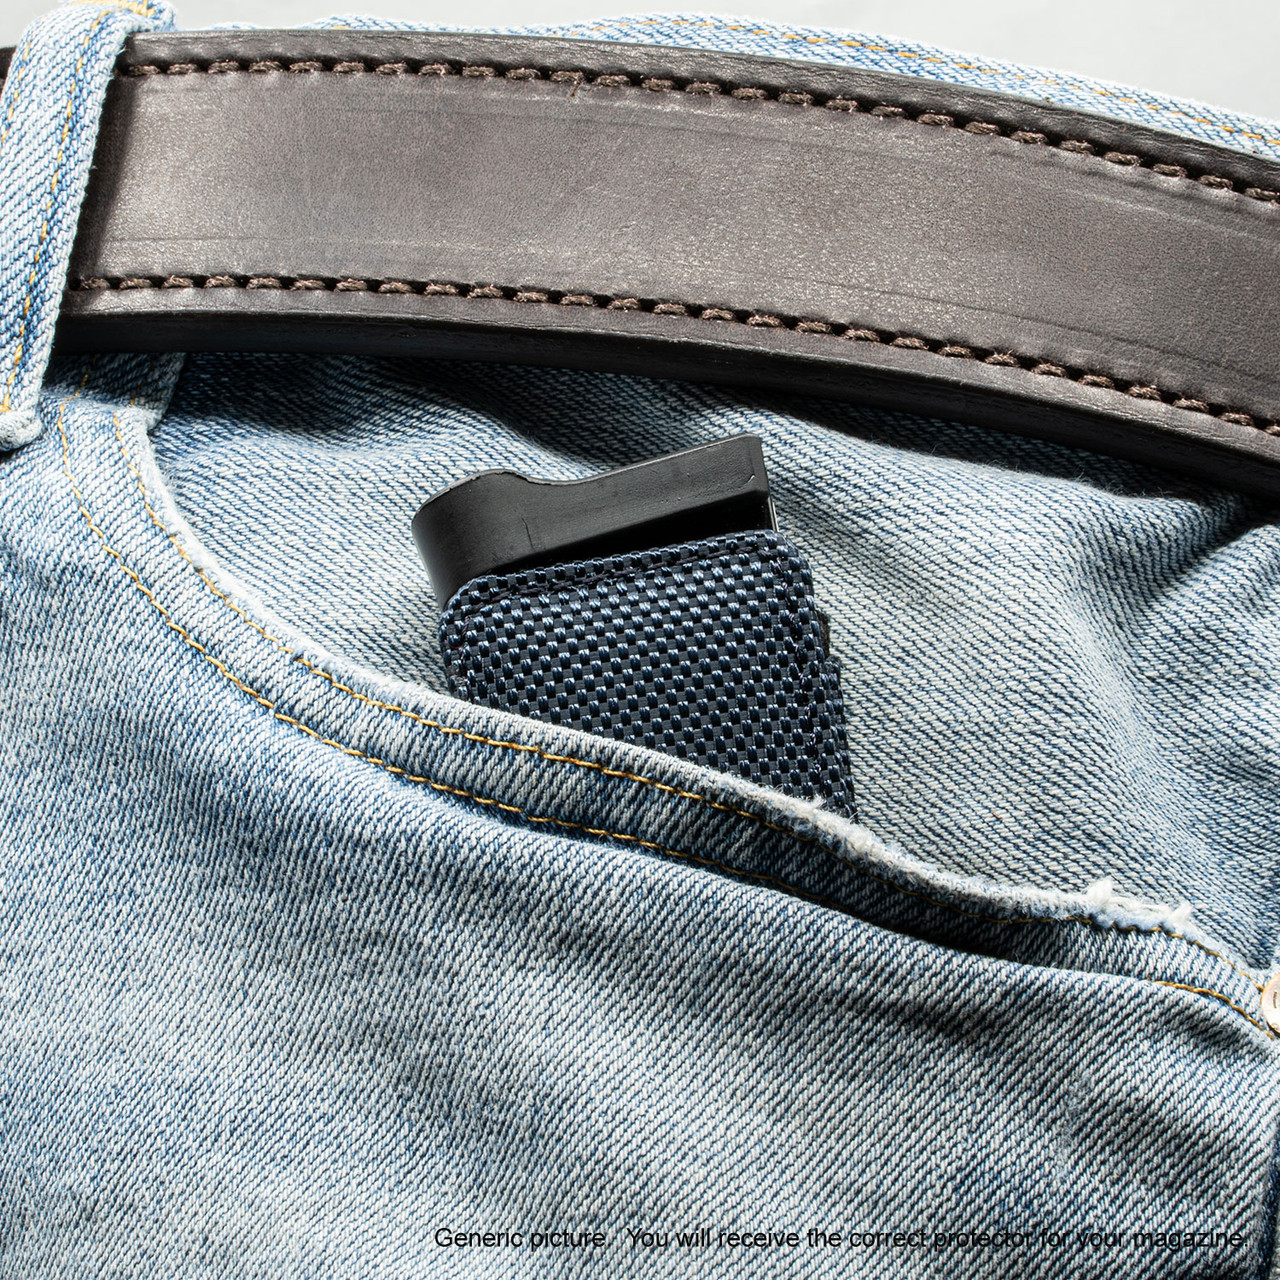 Ruger LC9 Blue Covert Magazine Pocket Protector